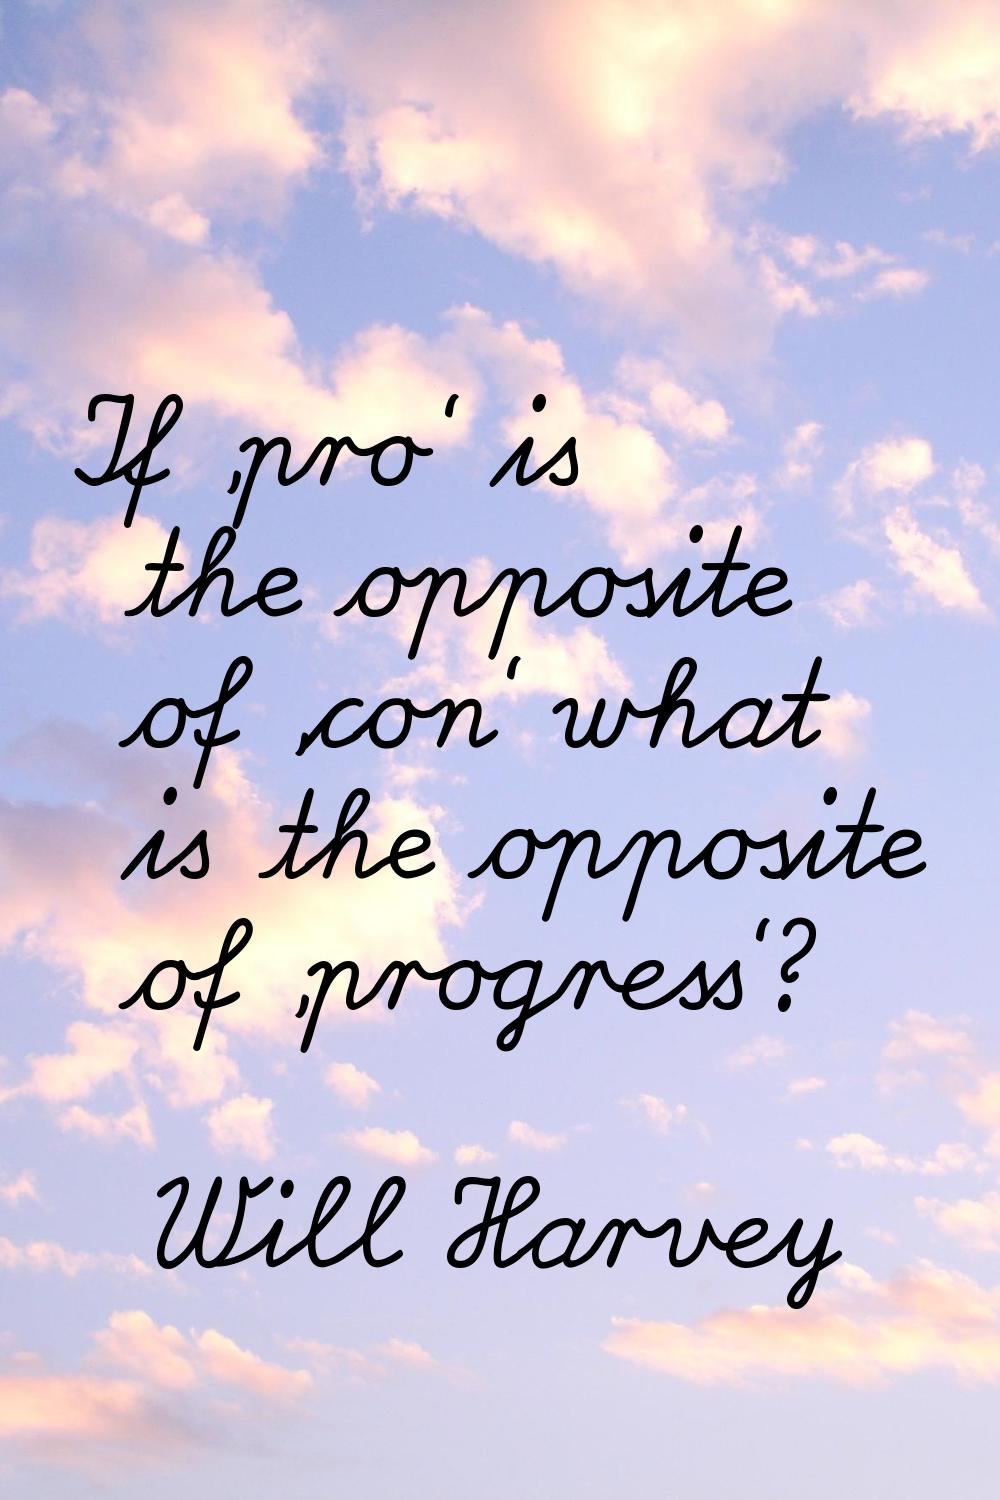 If 'pro' is the opposite of 'con' what is the opposite of 'progress'?